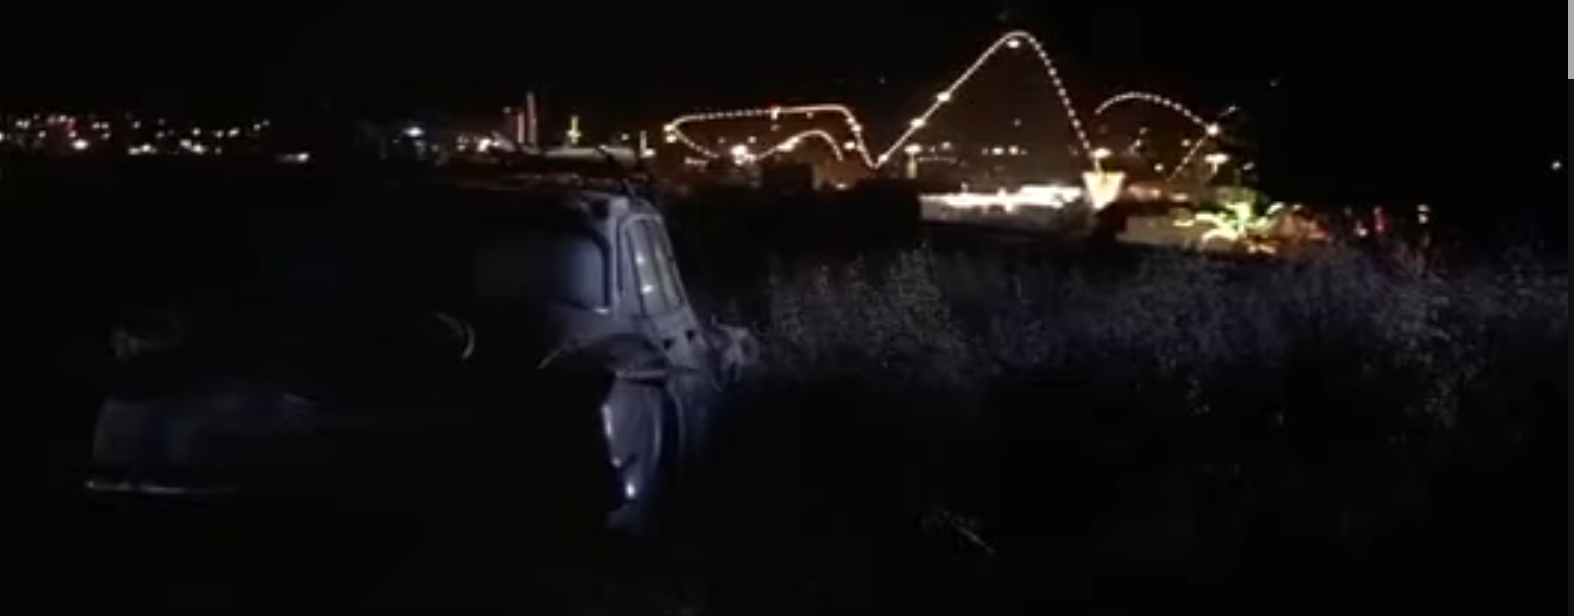 A car on a lovers lookout at night, in the background you can see the backside of Giant Dipper. Its track is lit by string lights.